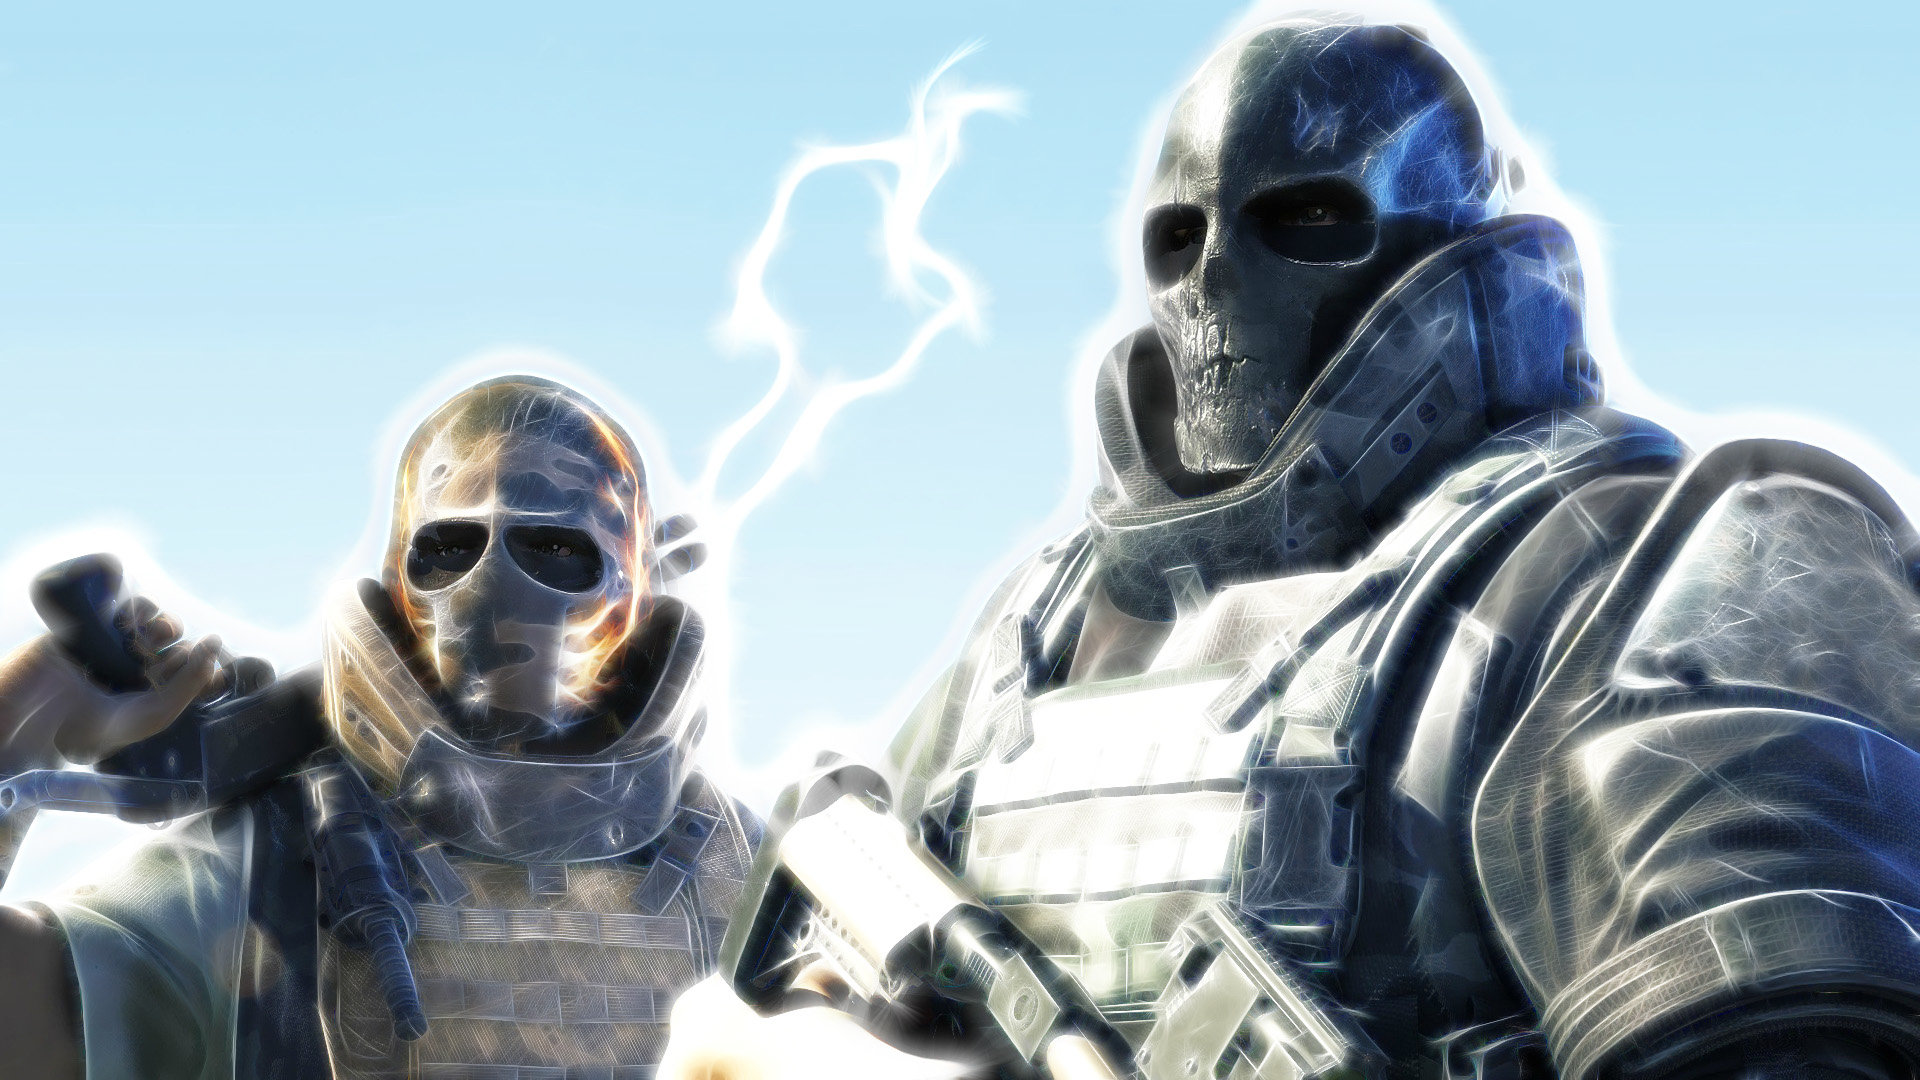 Awesome Army Of Two - Army Of Two , HD Wallpaper & Backgrounds